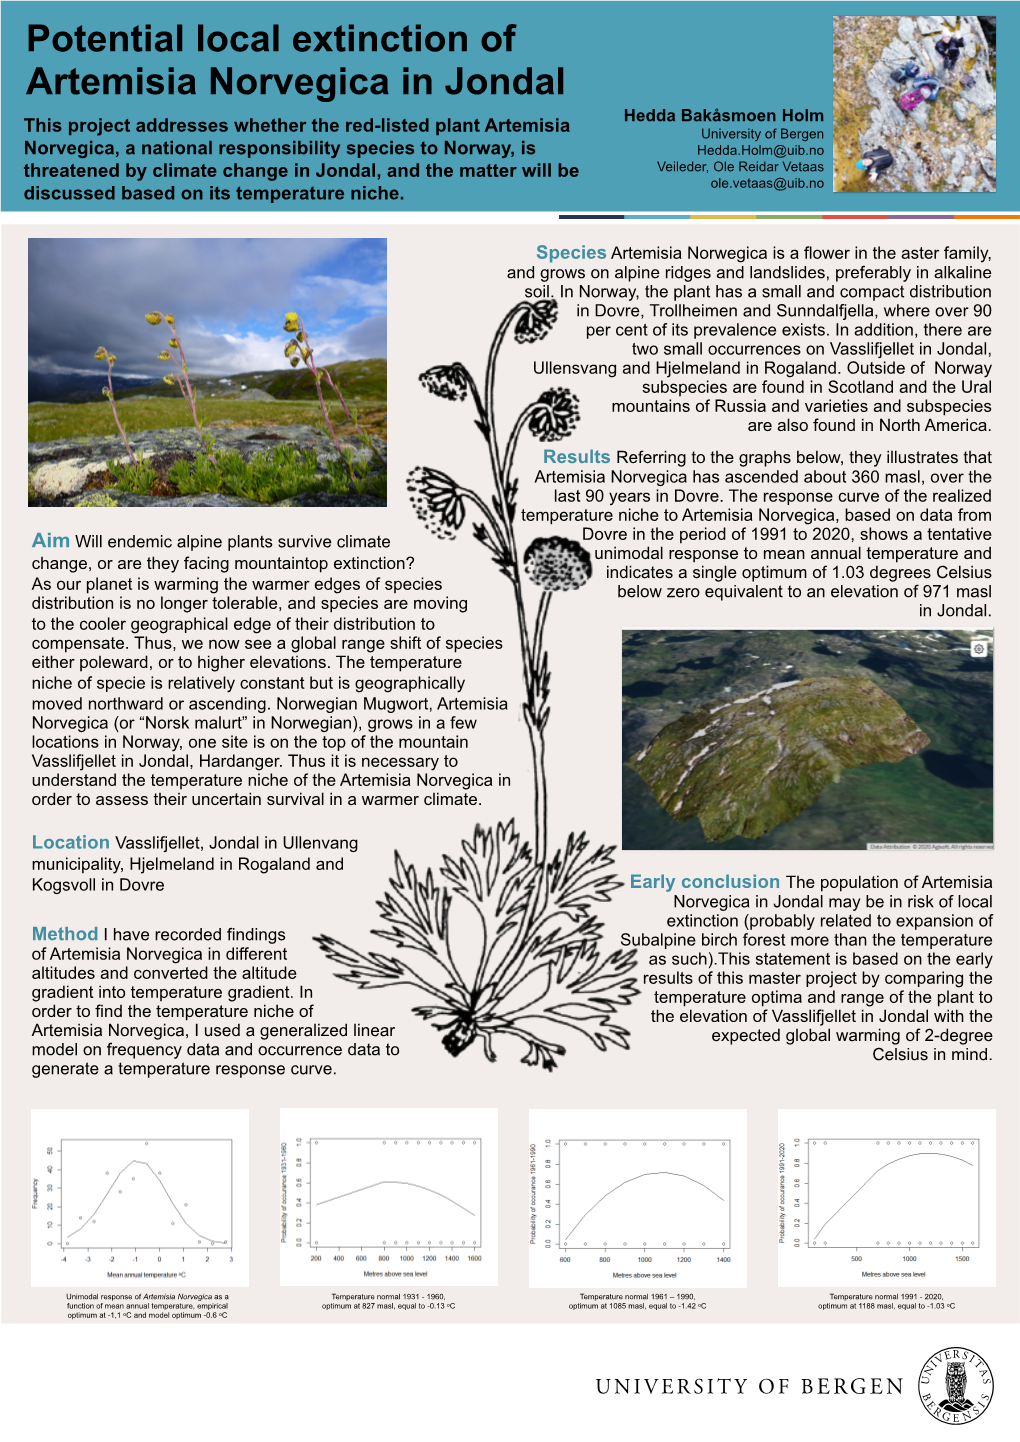 This Project Addresses Whether the Red-Listed Plant Artemisia Norvegica